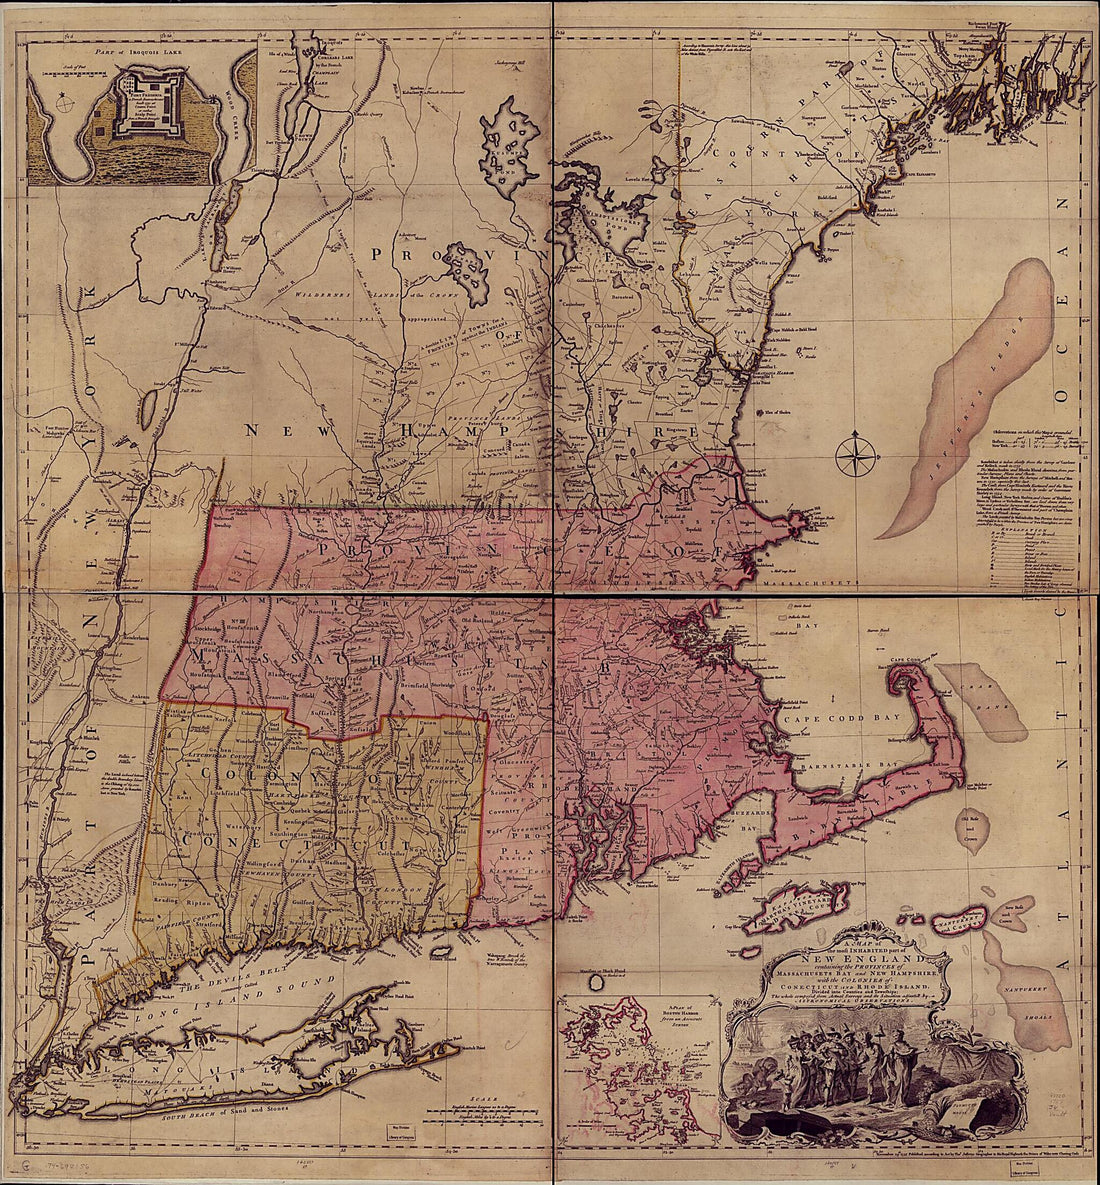 This old map of A Map of the Most Inhabited Part of New England : Containing the Provinces of Massachusets Bay and New Hampshire, With the Colonies of Conecticut and Rhode Island, Divided Into Counties and Townships : the Whole Composed from Actual Surve